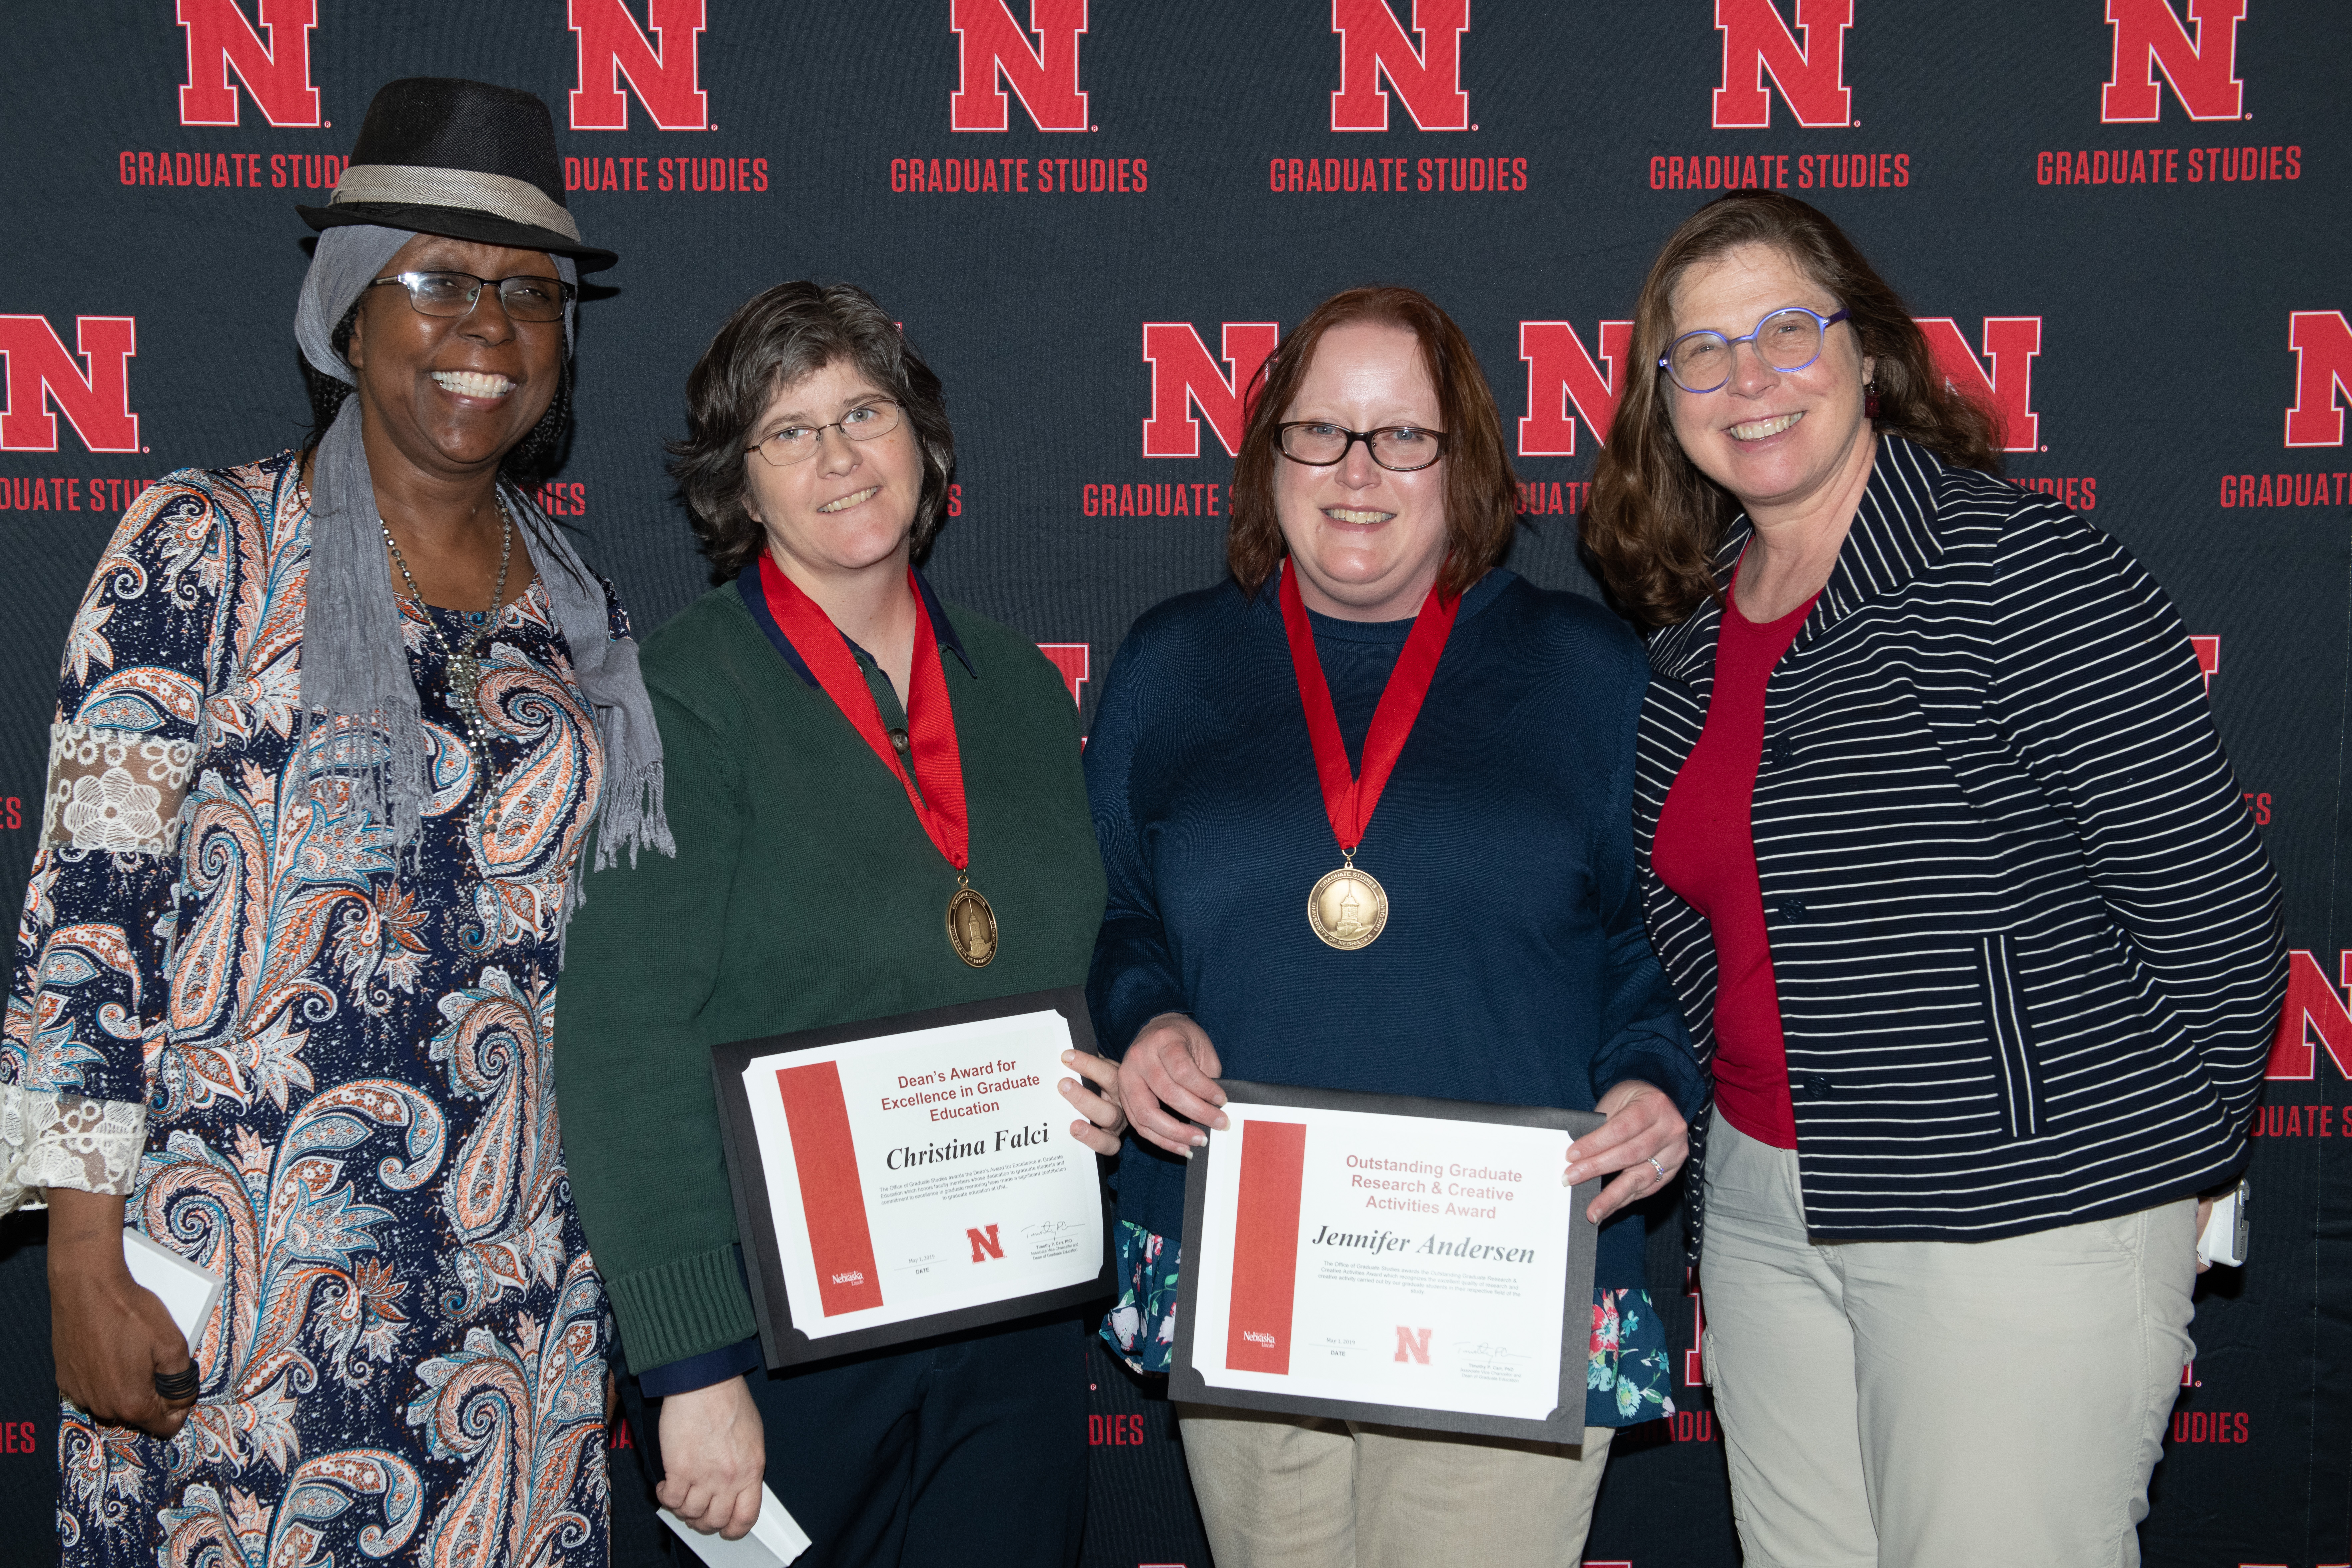 Photo Credit: 2019 Graduate Fellowship and Awards Luncheon 3